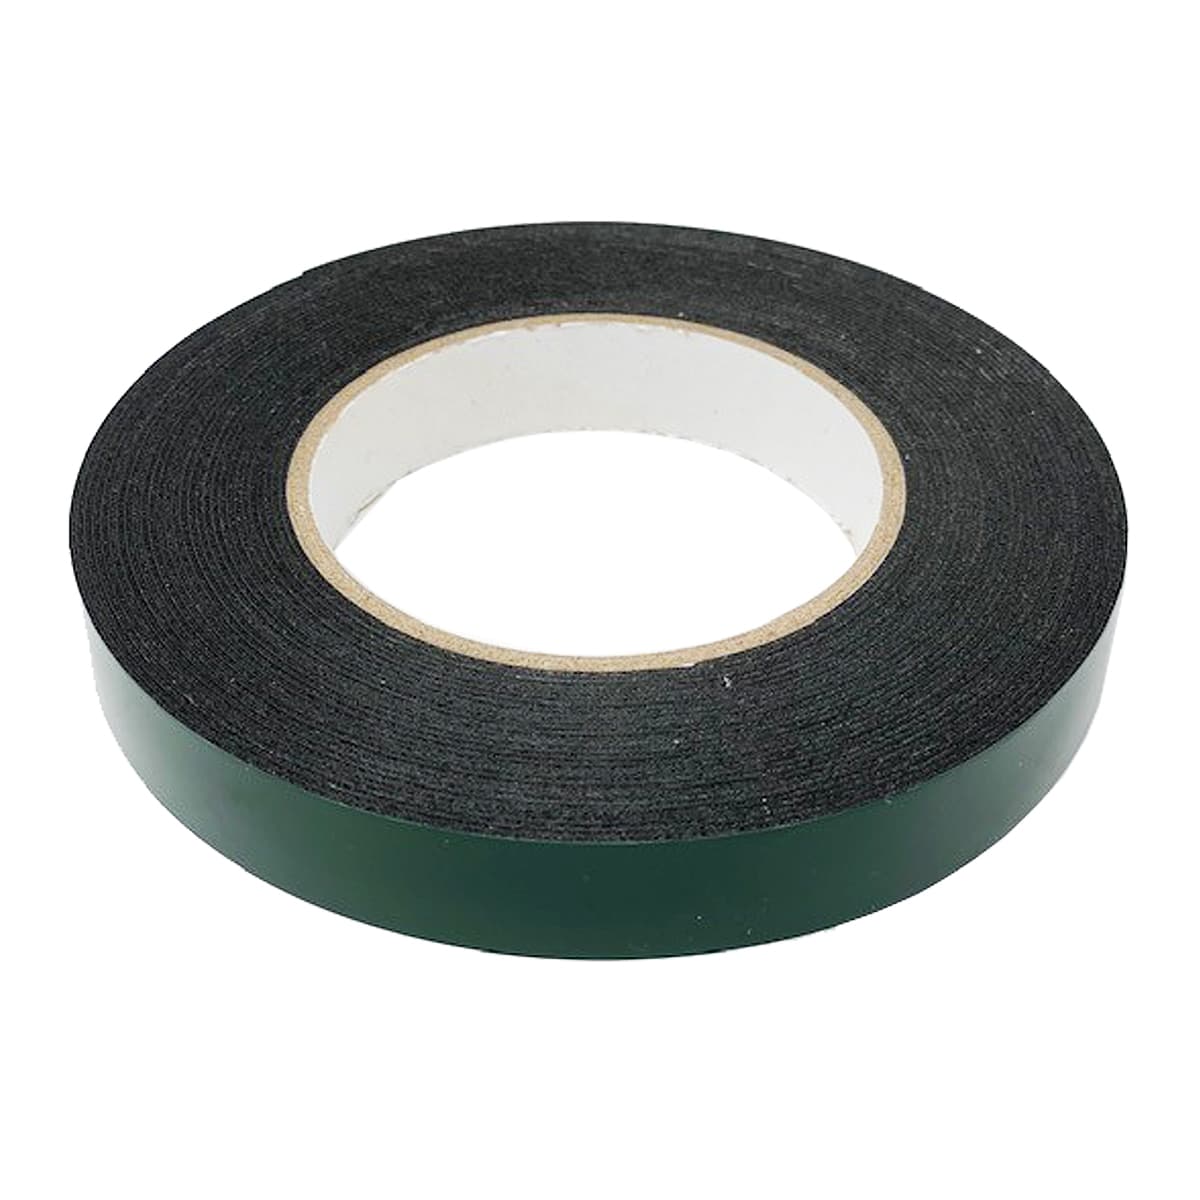 19mm x 10M Double Sided Adhesive Foam Tape Black Automotive for Trim & Body